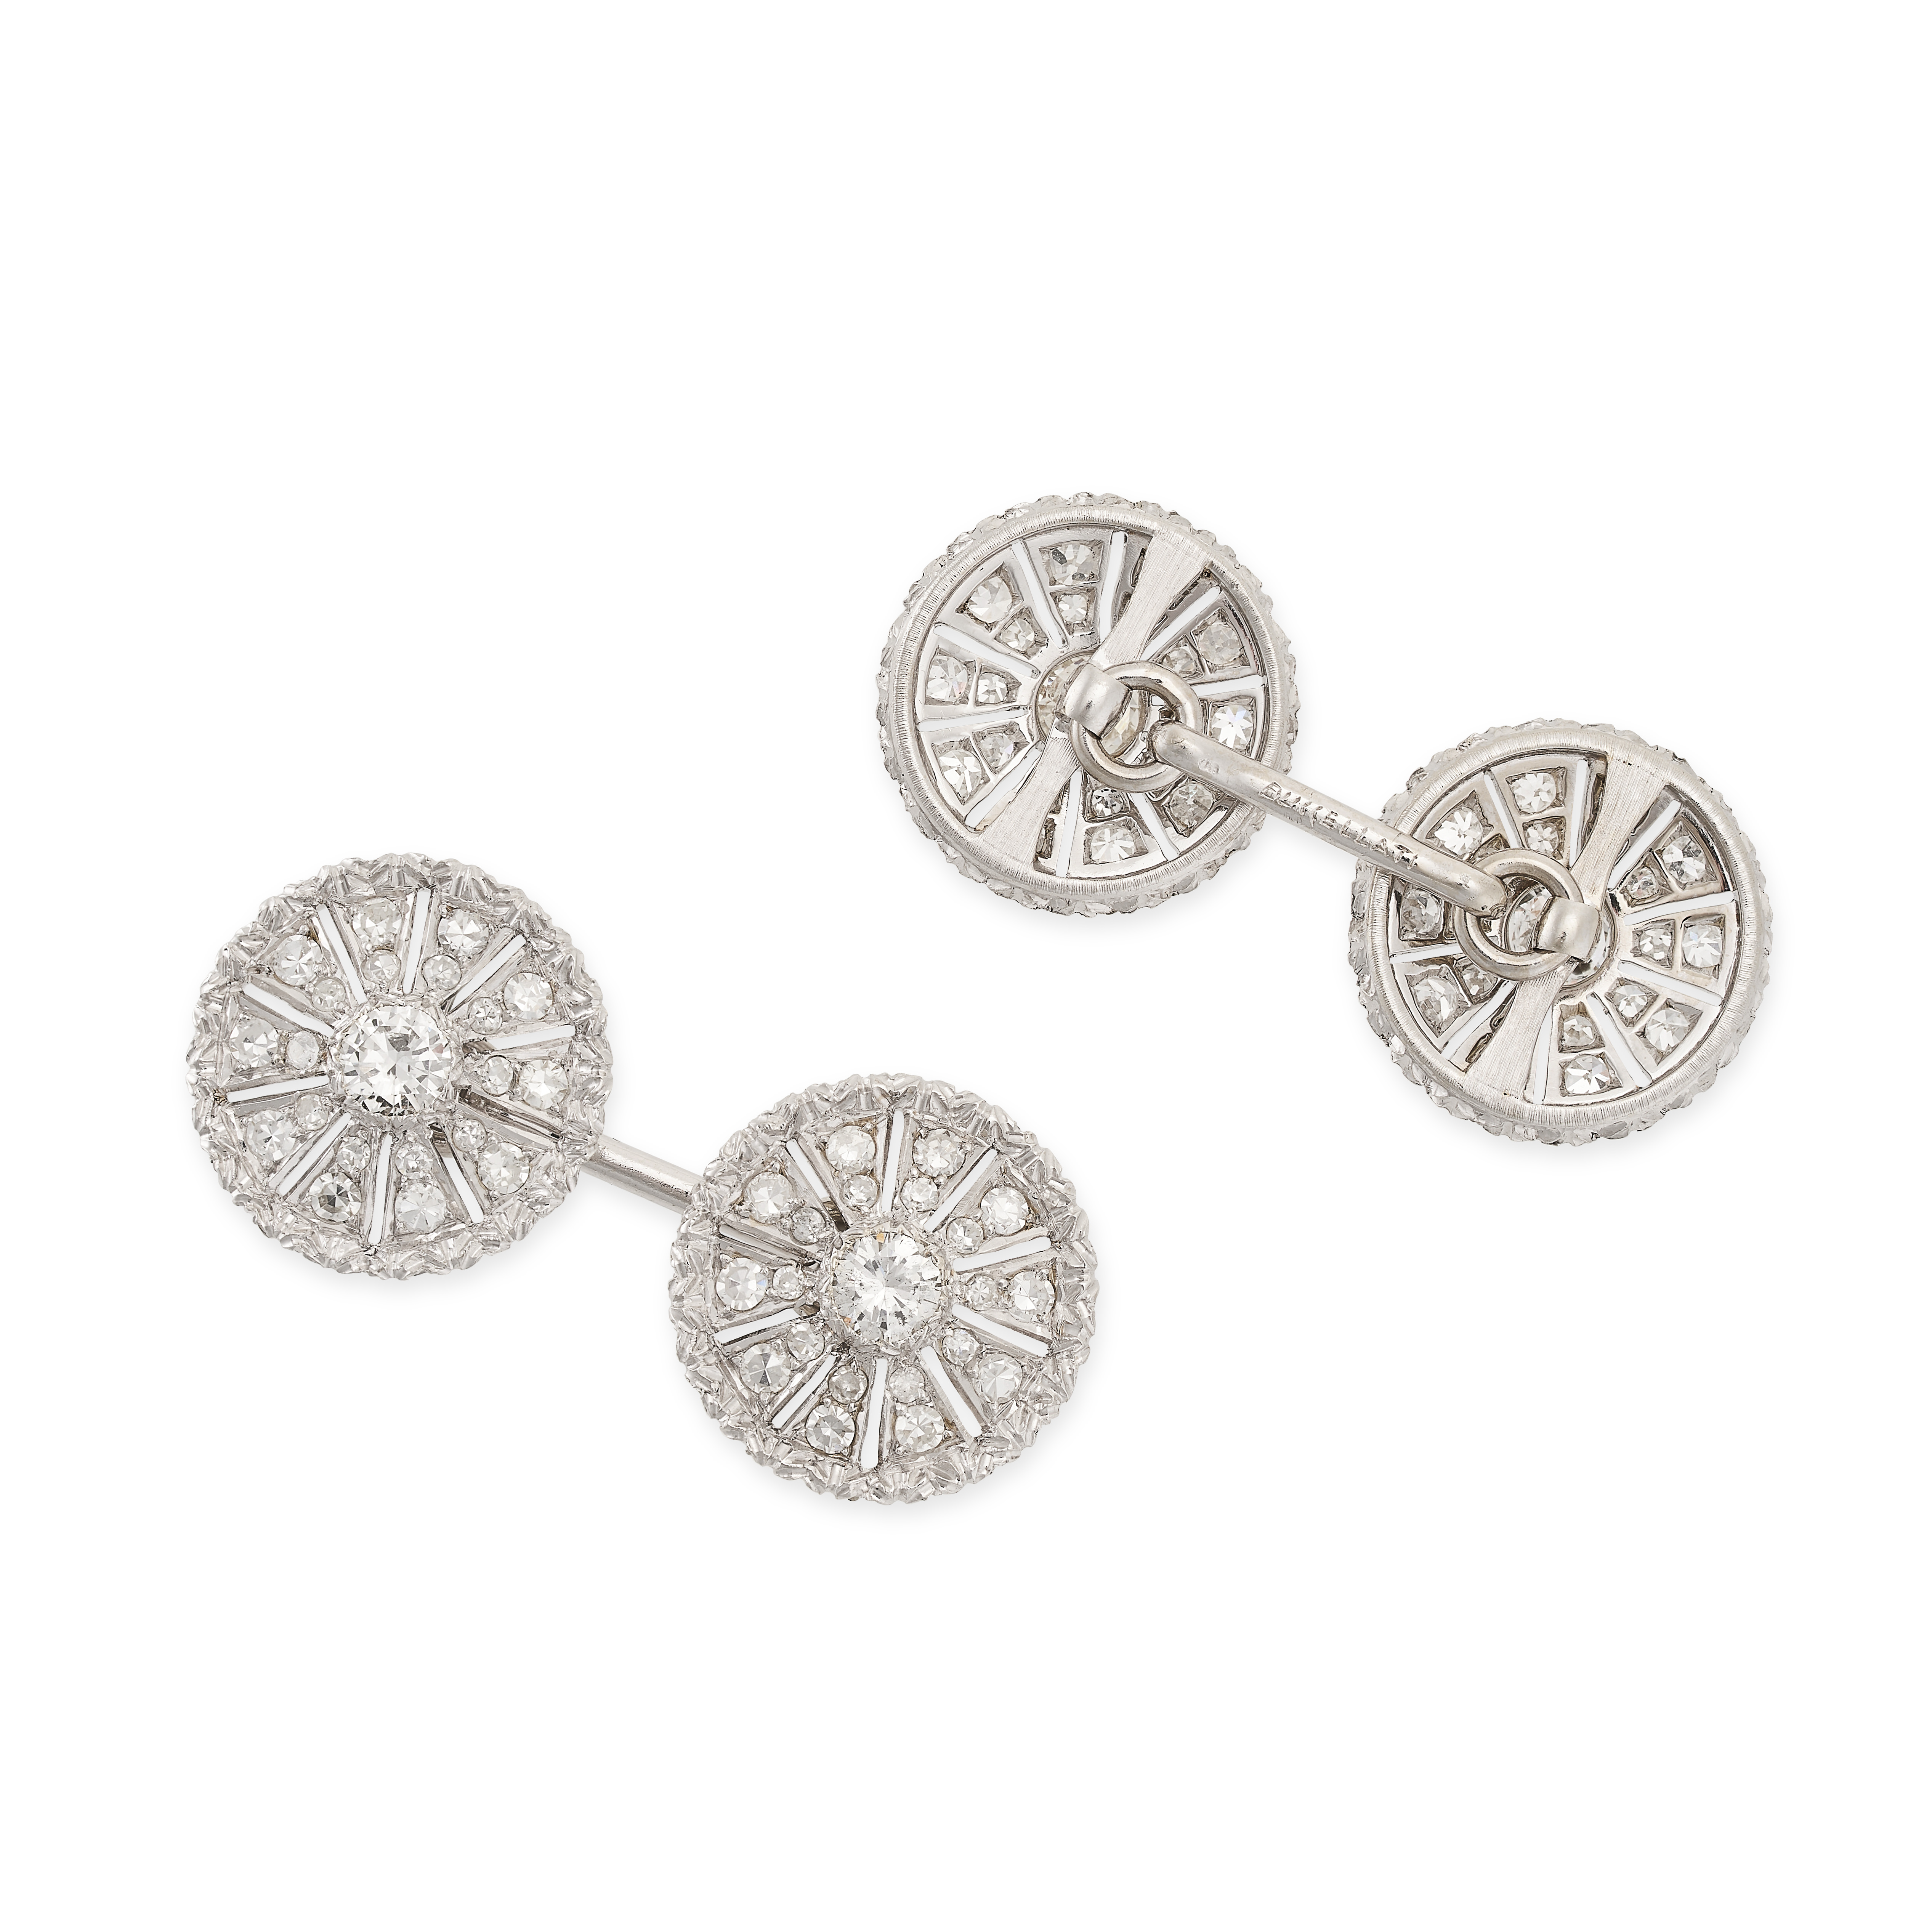 BUCCELLATI, A PAIR OF DIAMOND CUFFLINKS, 1950S the circular faces designed as wheels, set with a - Image 2 of 2